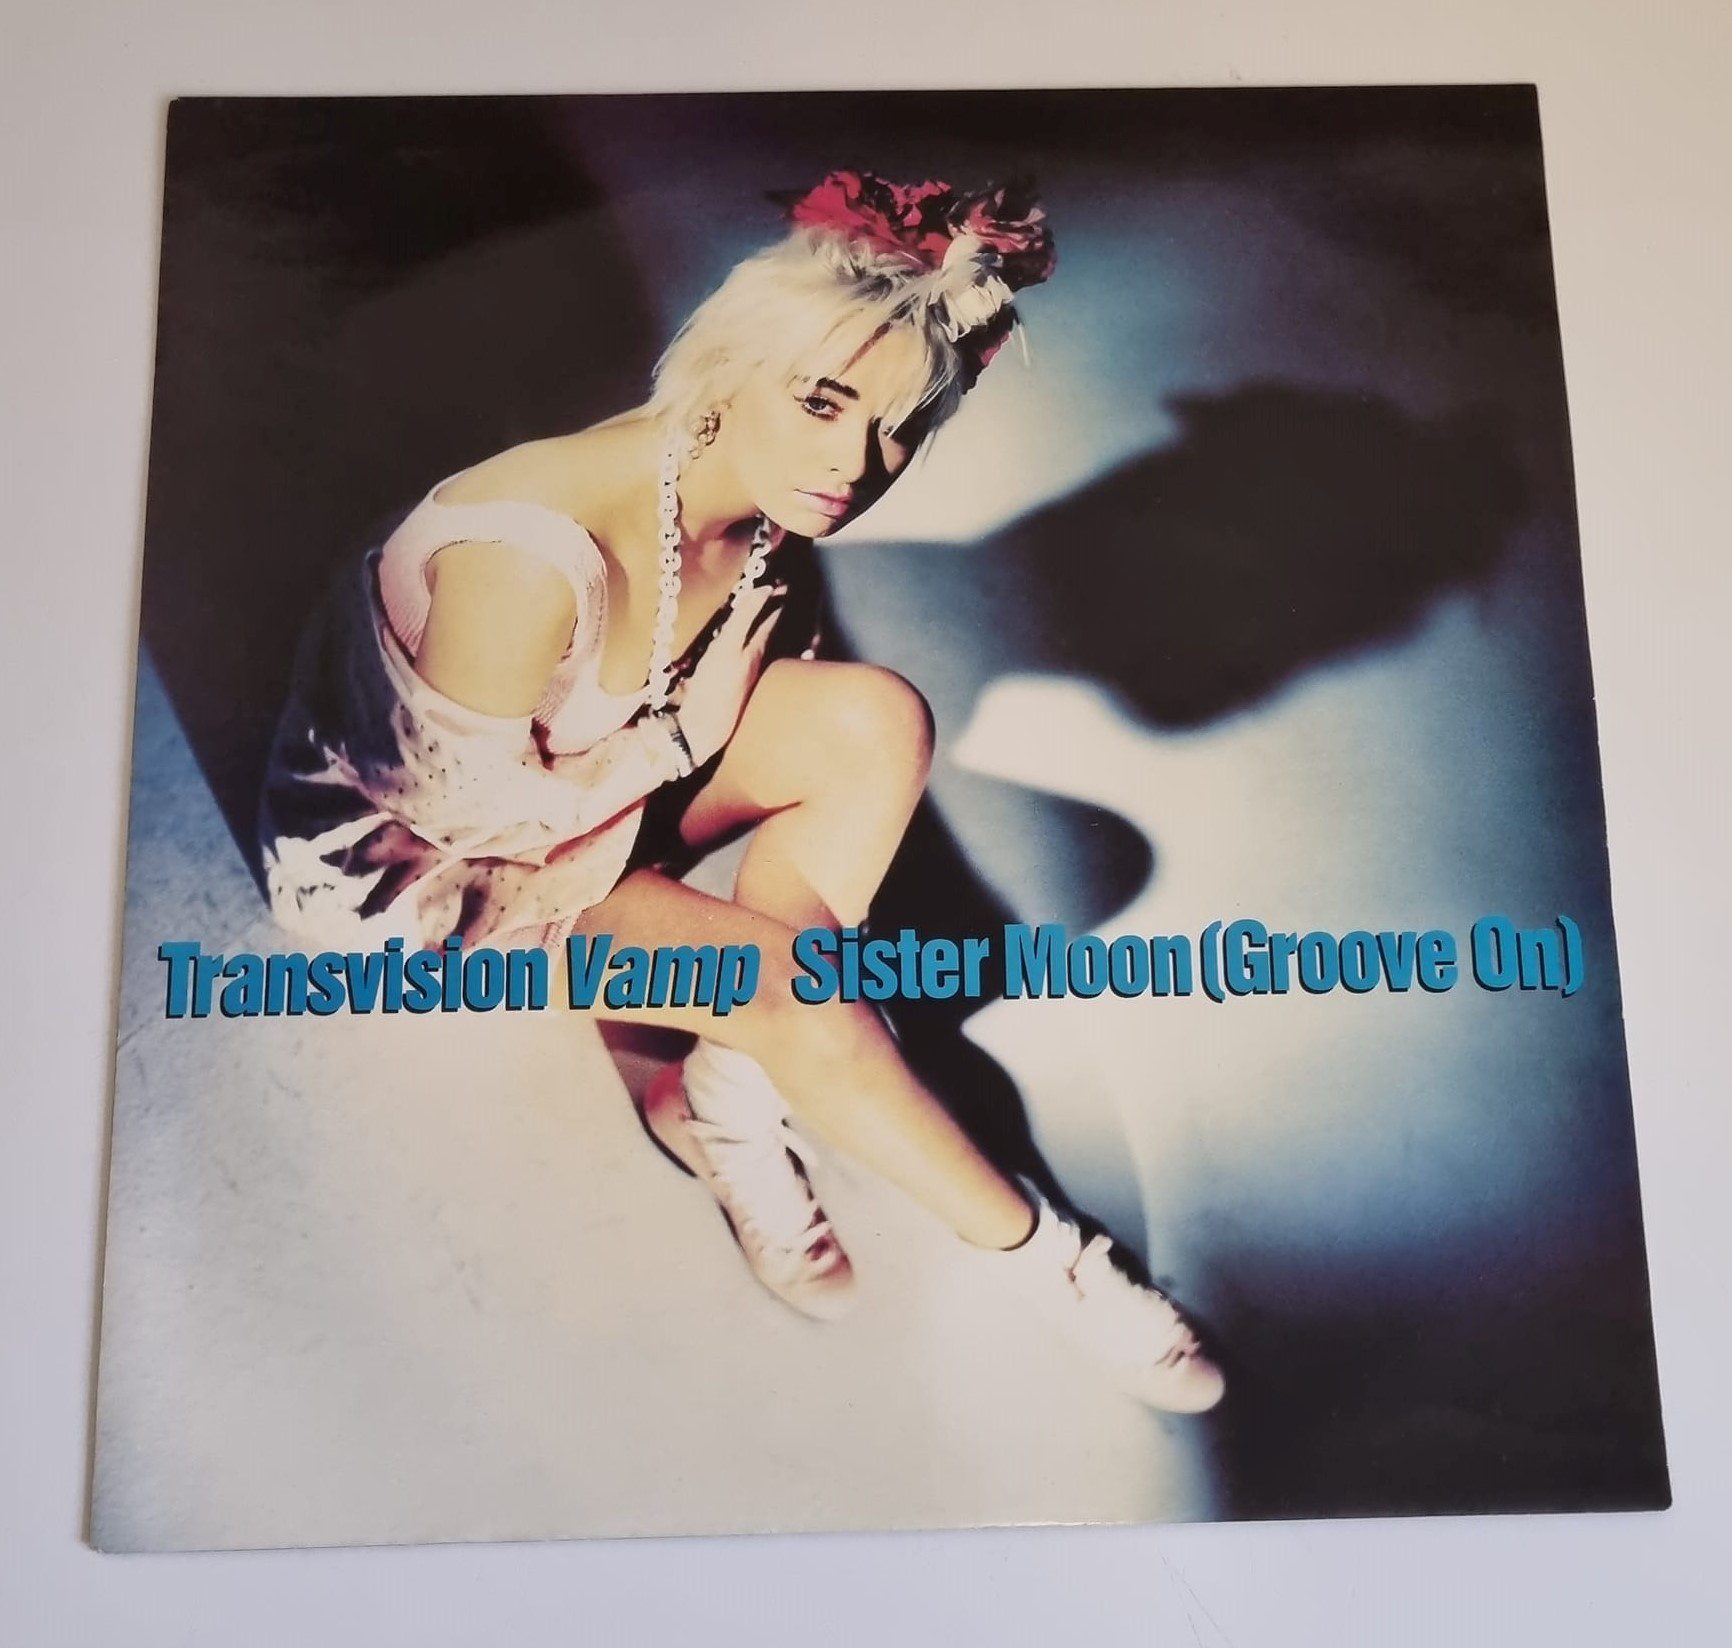 Buy this rare Transvision Vamp record by clicking here